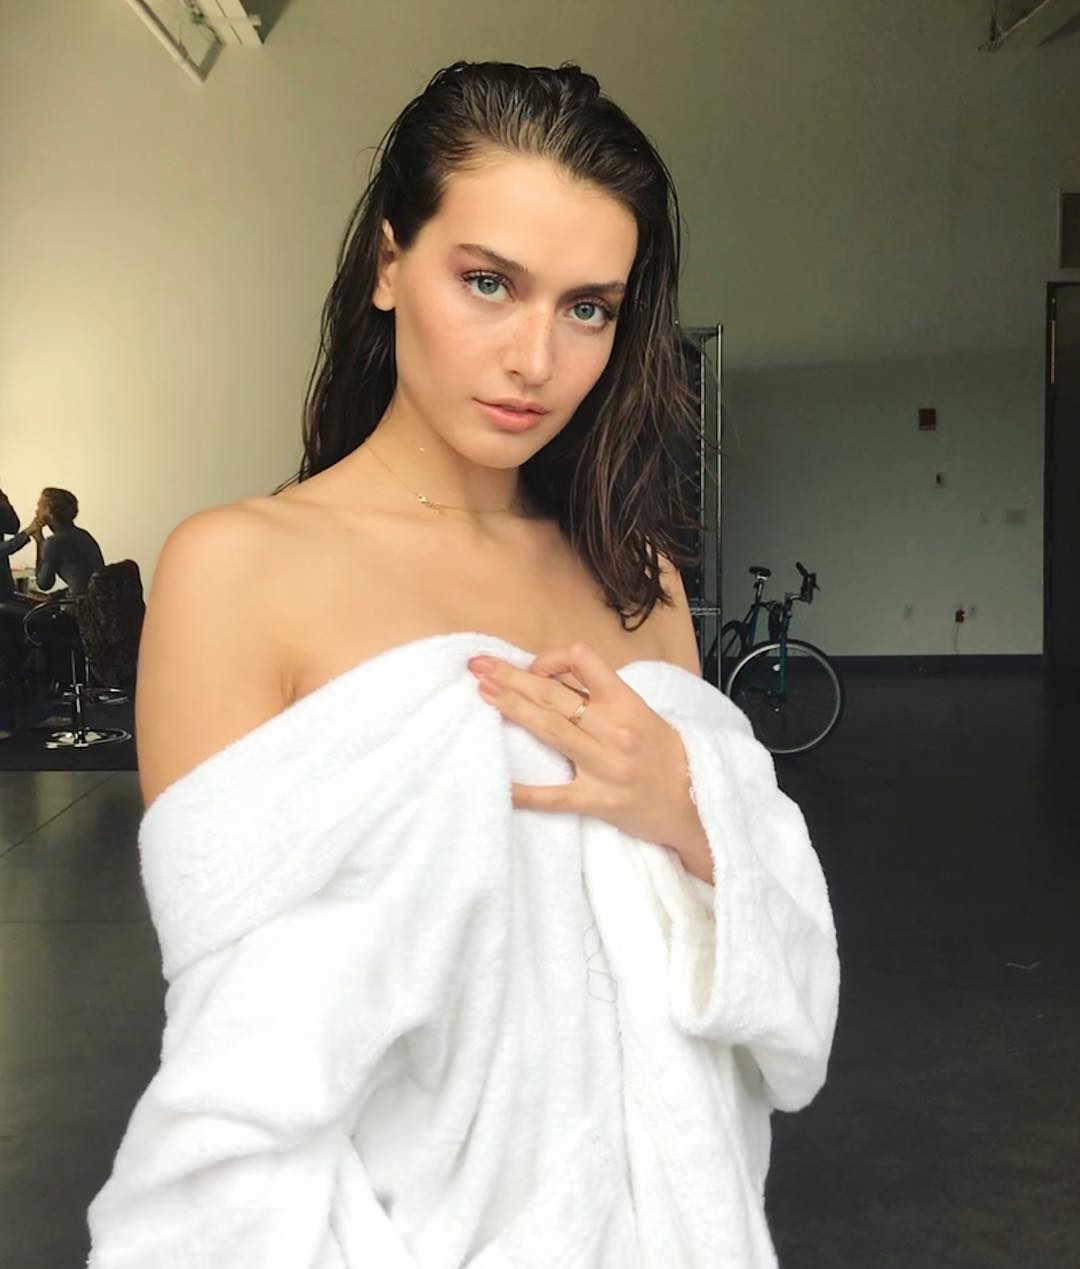 Topless jessica clements Braless Jessica